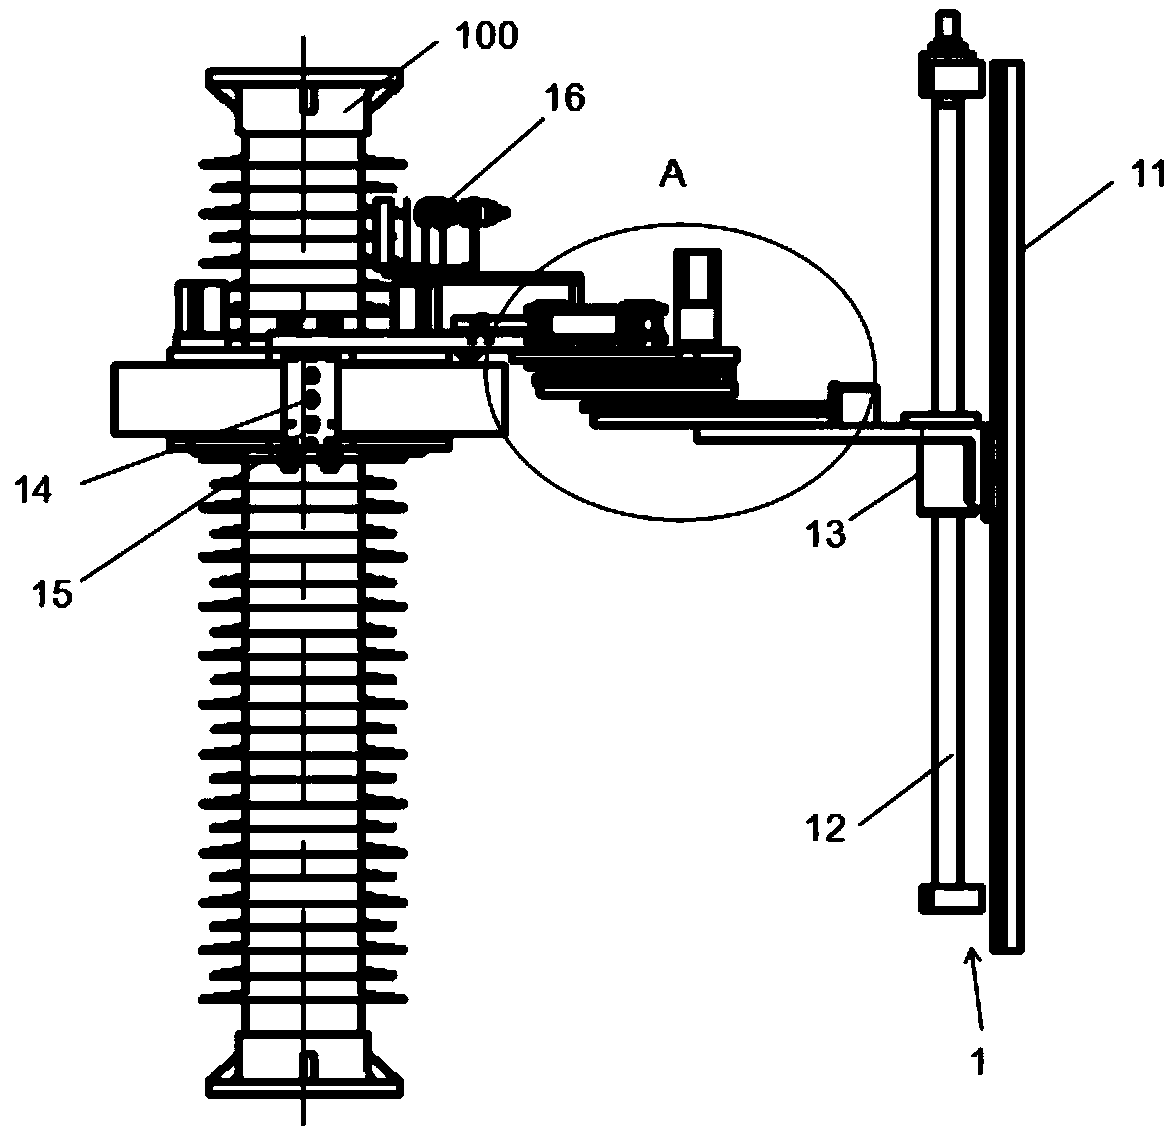 Insulator cleaning device